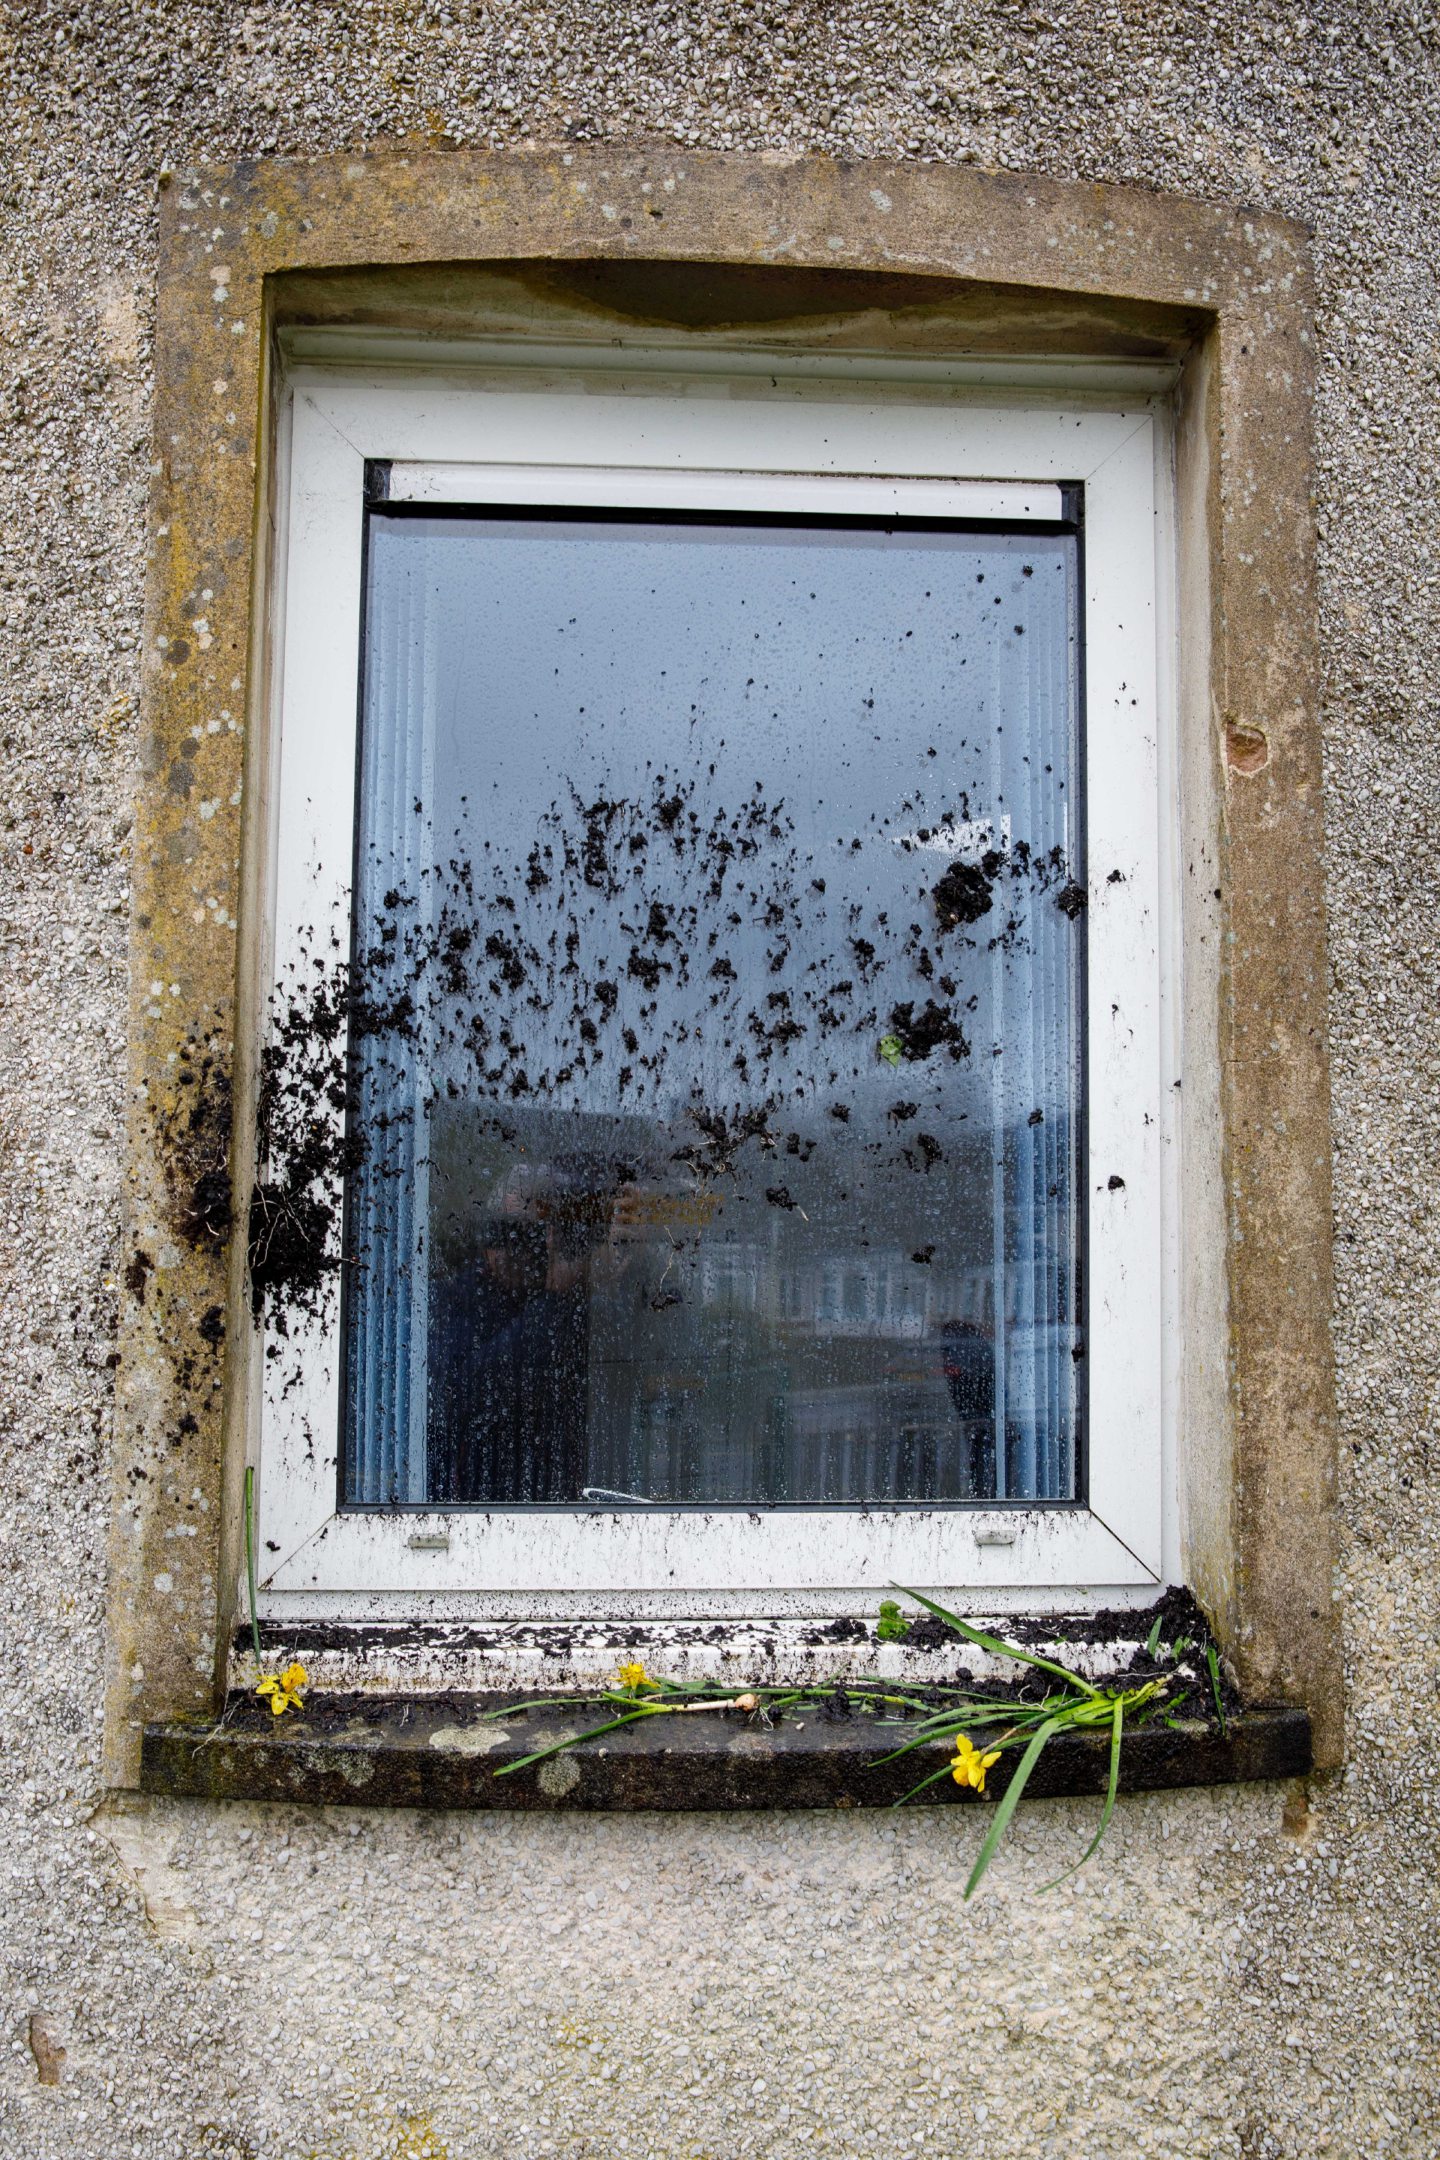 A plant was thrown at one of the windows.